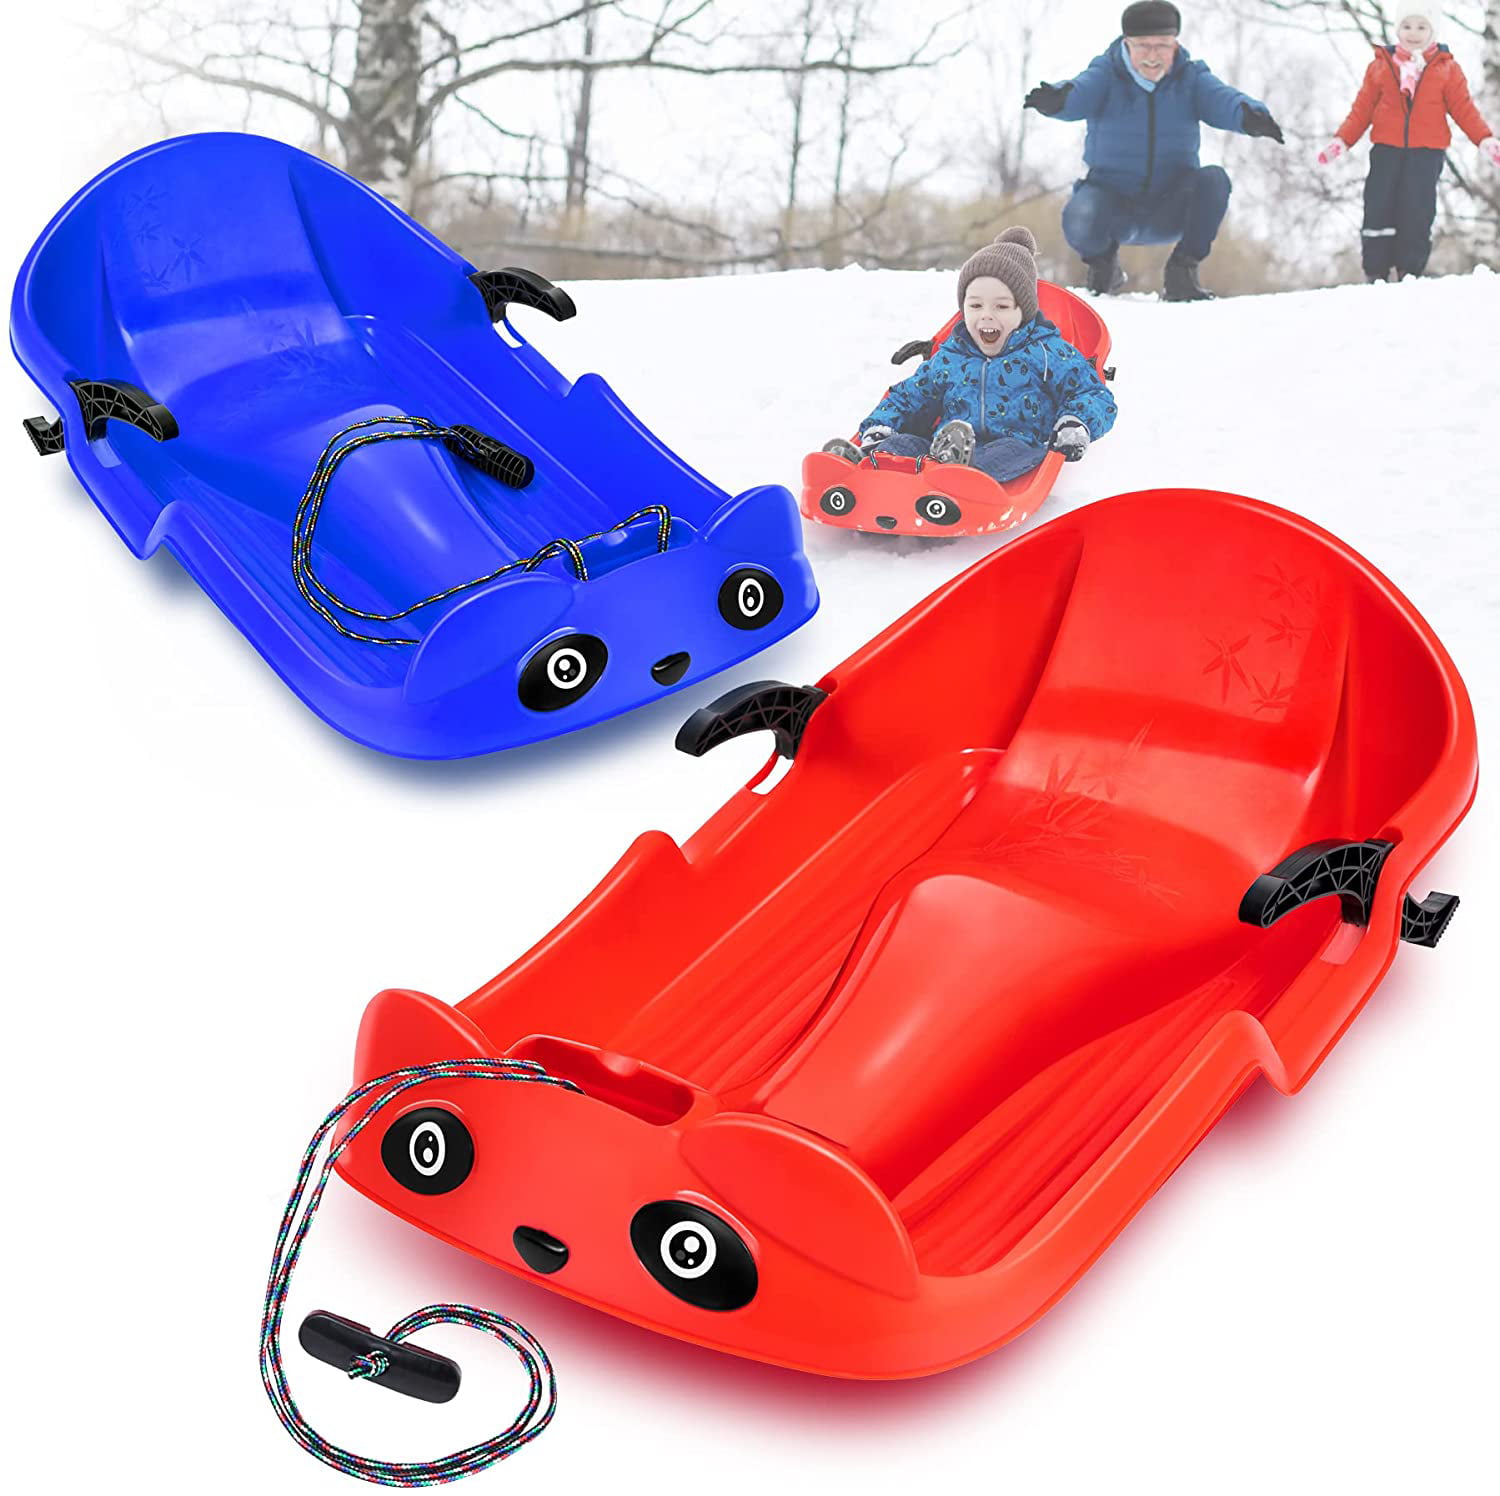 RED Children's Kid's Snow Sledge with Steering brakes Sled Sleigh Winter Fun 